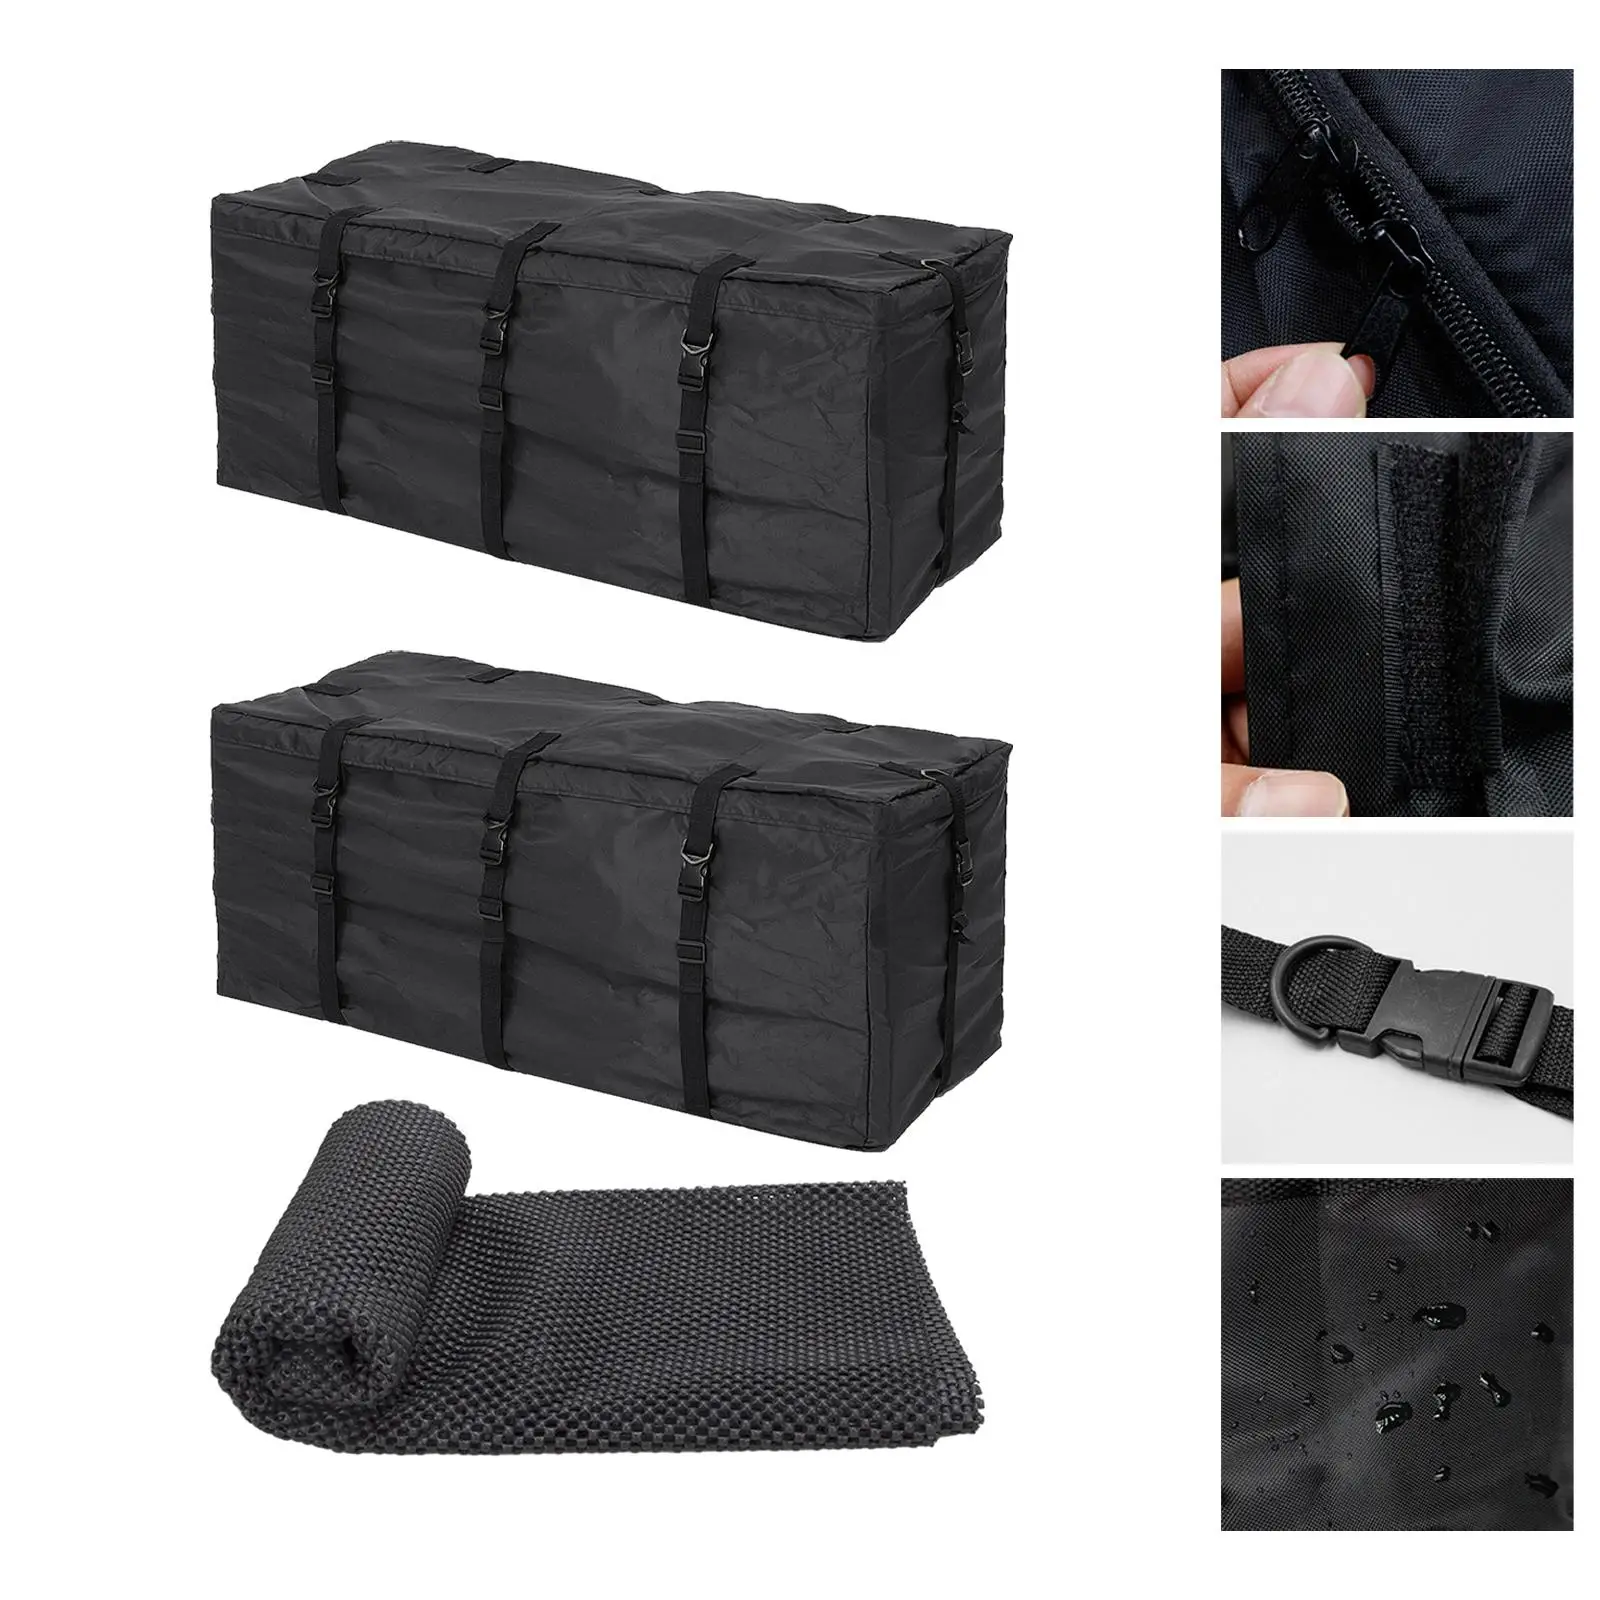 Car Rooftop Bag Durable Travel Accessories Waterproof Roof Luggage Cargo Carrier Bag Car Roof Luggage Bag for Vehicles Cars